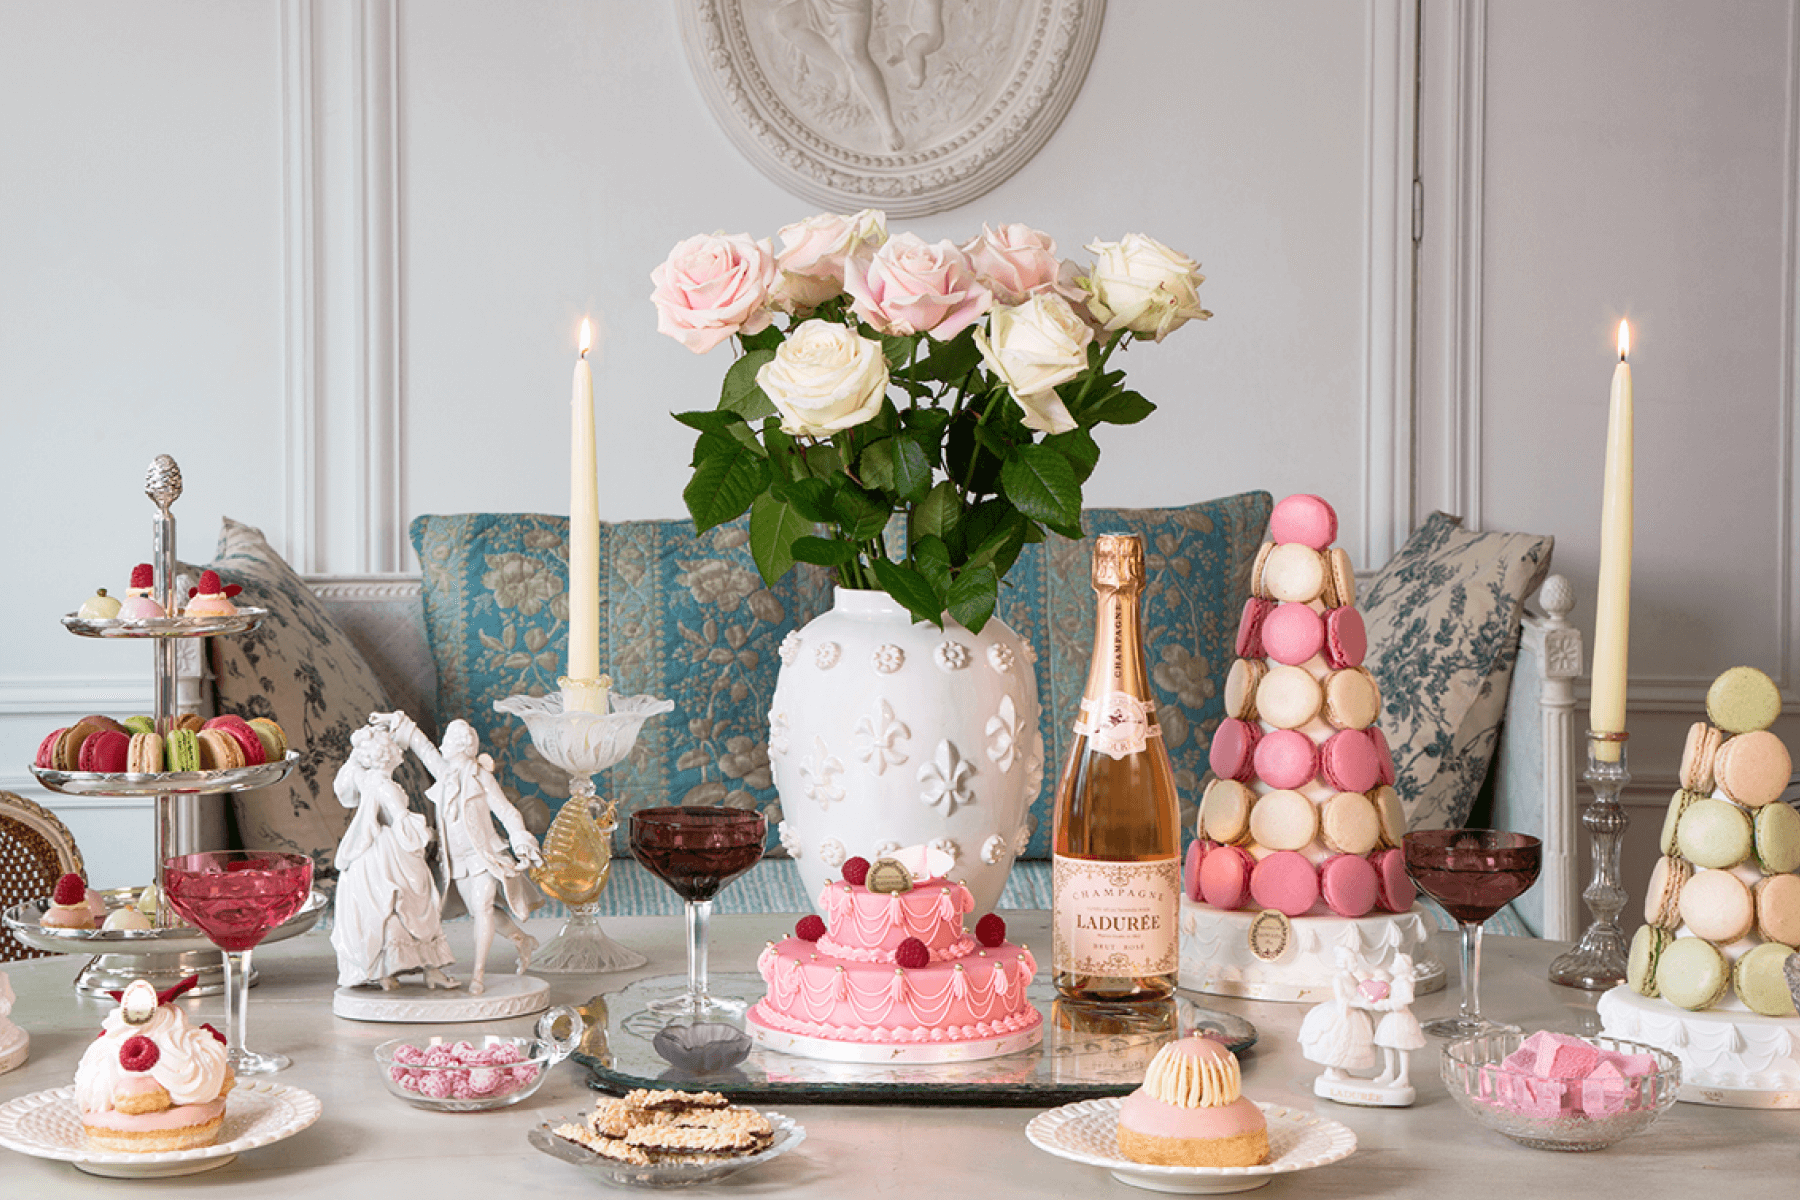 A veritable spread of delectable desserts including tiers of macarons, a cake, and other pastries along with rosé wine, roses, and candles on a bare white table.